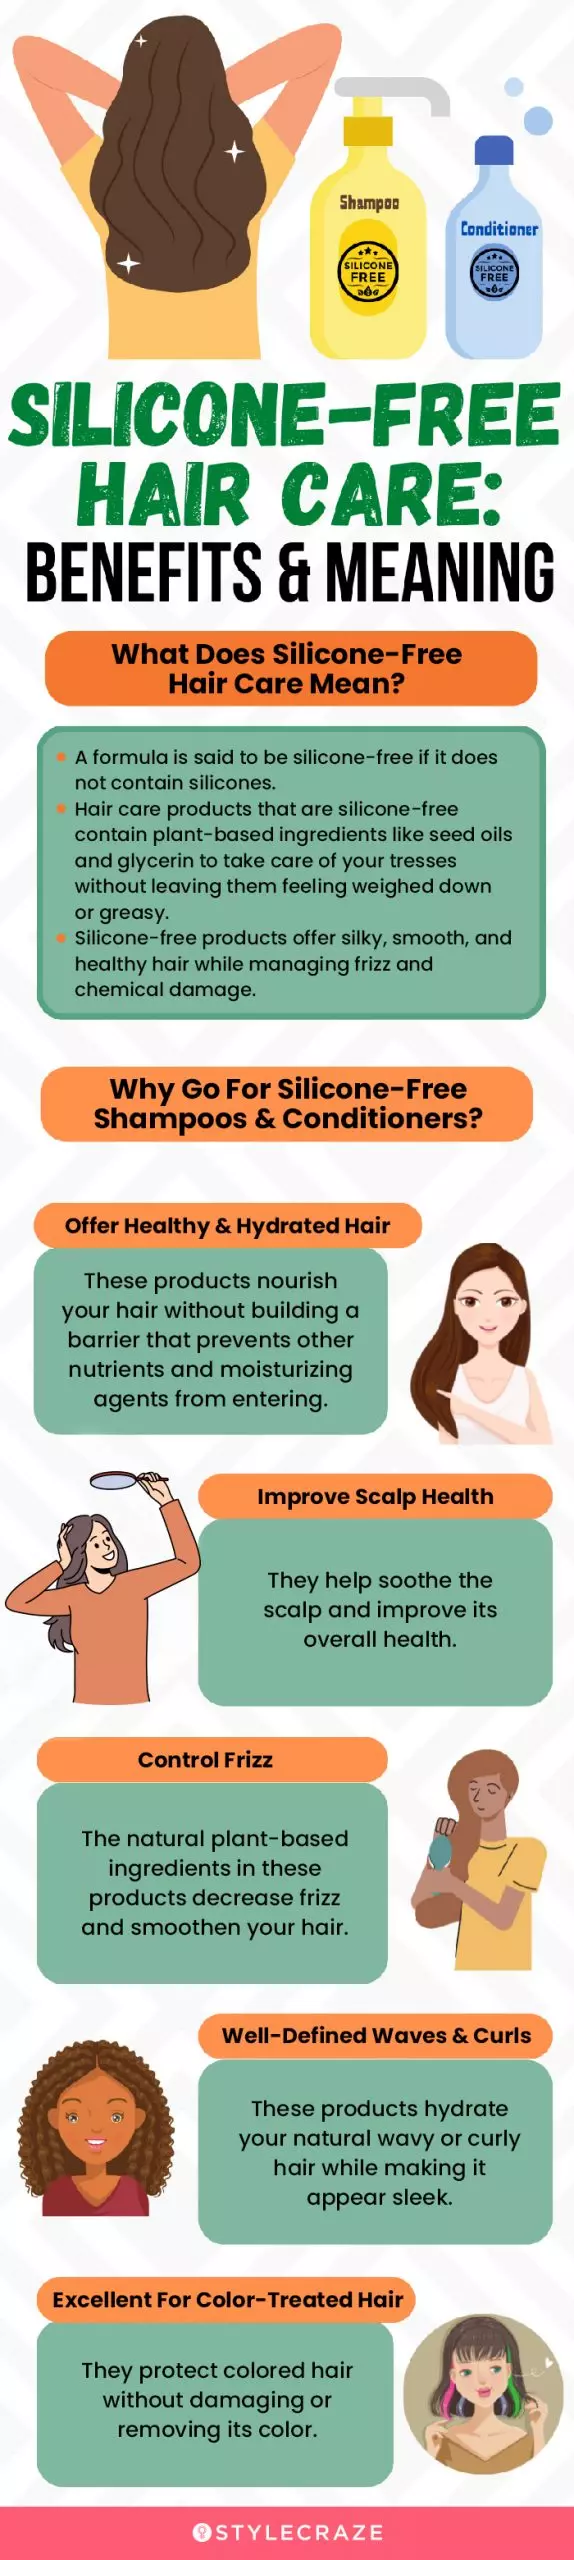 Silicone-Free Hair Care: Benefits & Meaning (infographic)